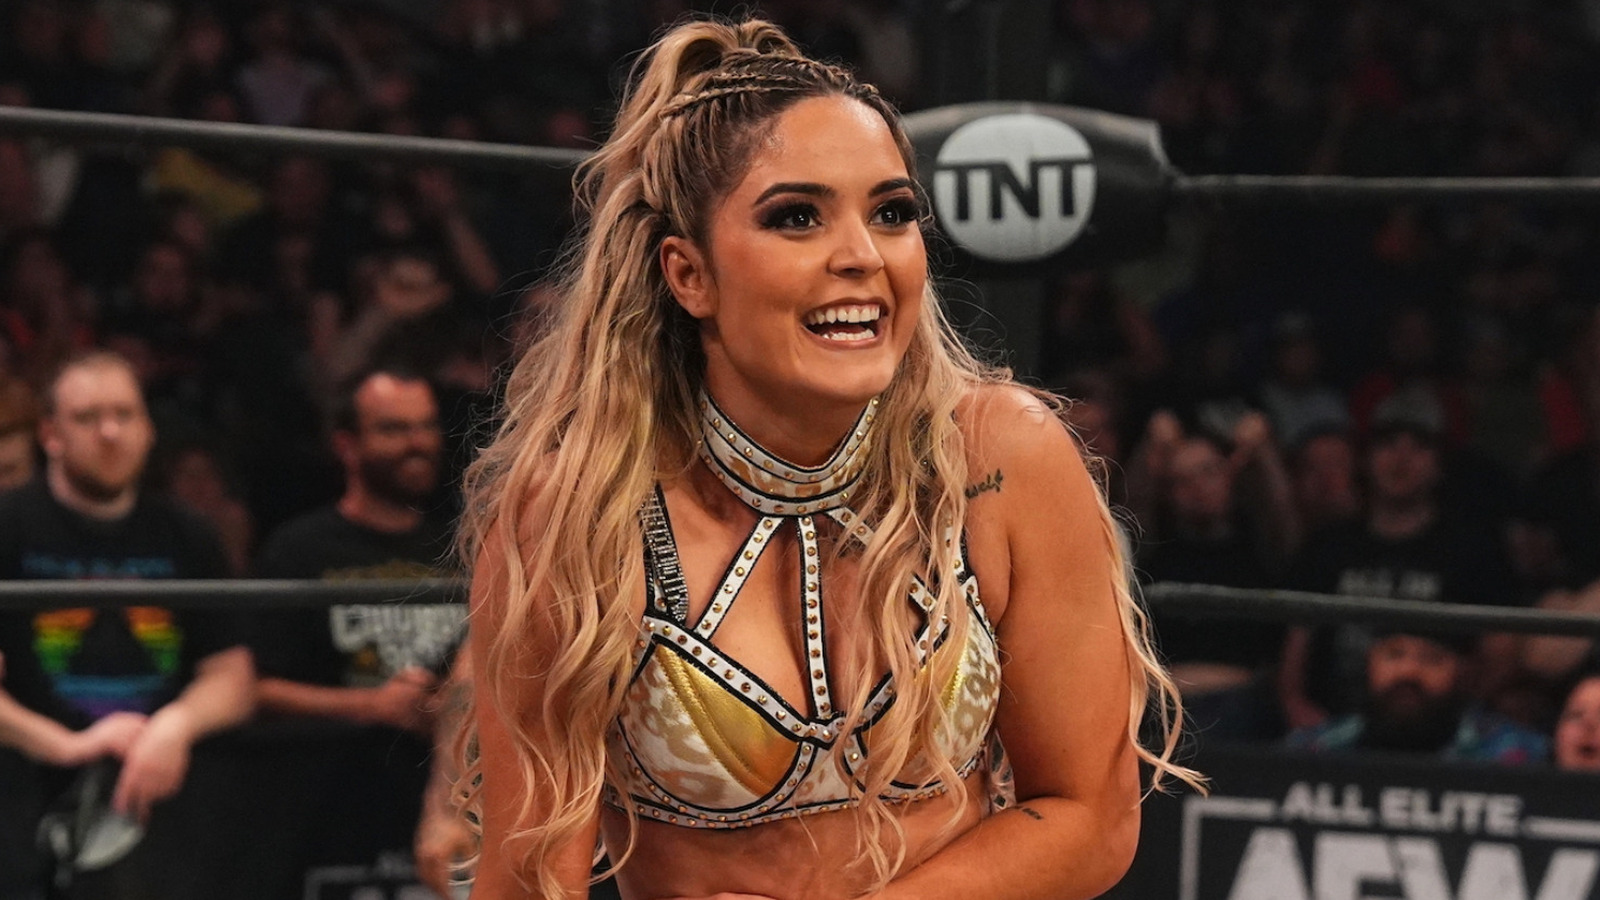 AEW's Tay Melo Posts Pic With 'One Of The Coolest Wrestlers' (Not Sammy Guevara)